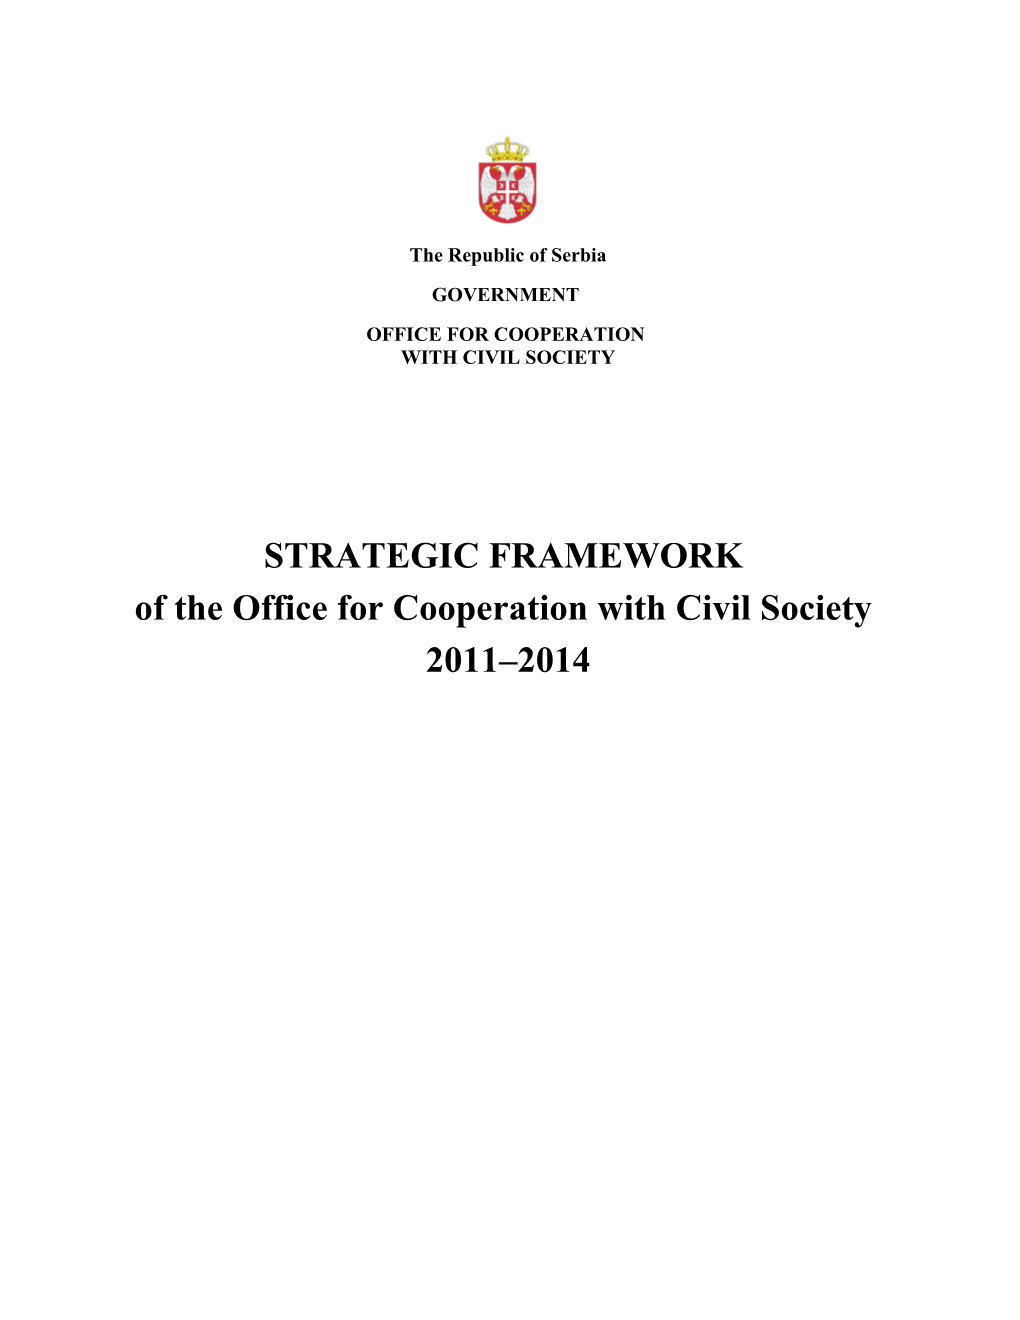 Of the Office for Cooperation with Civil Society